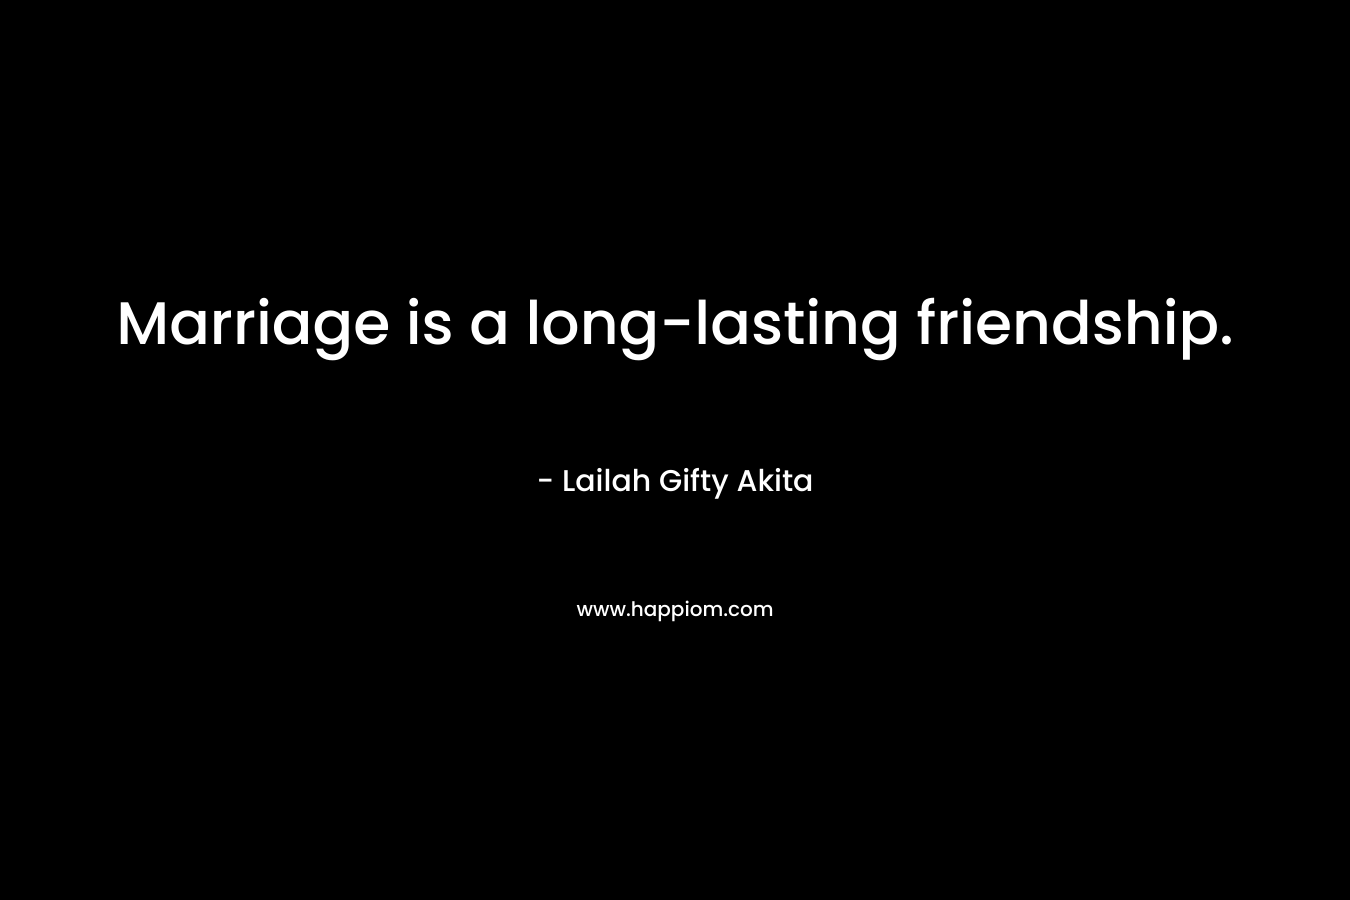 Marriage is a long-lasting friendship.